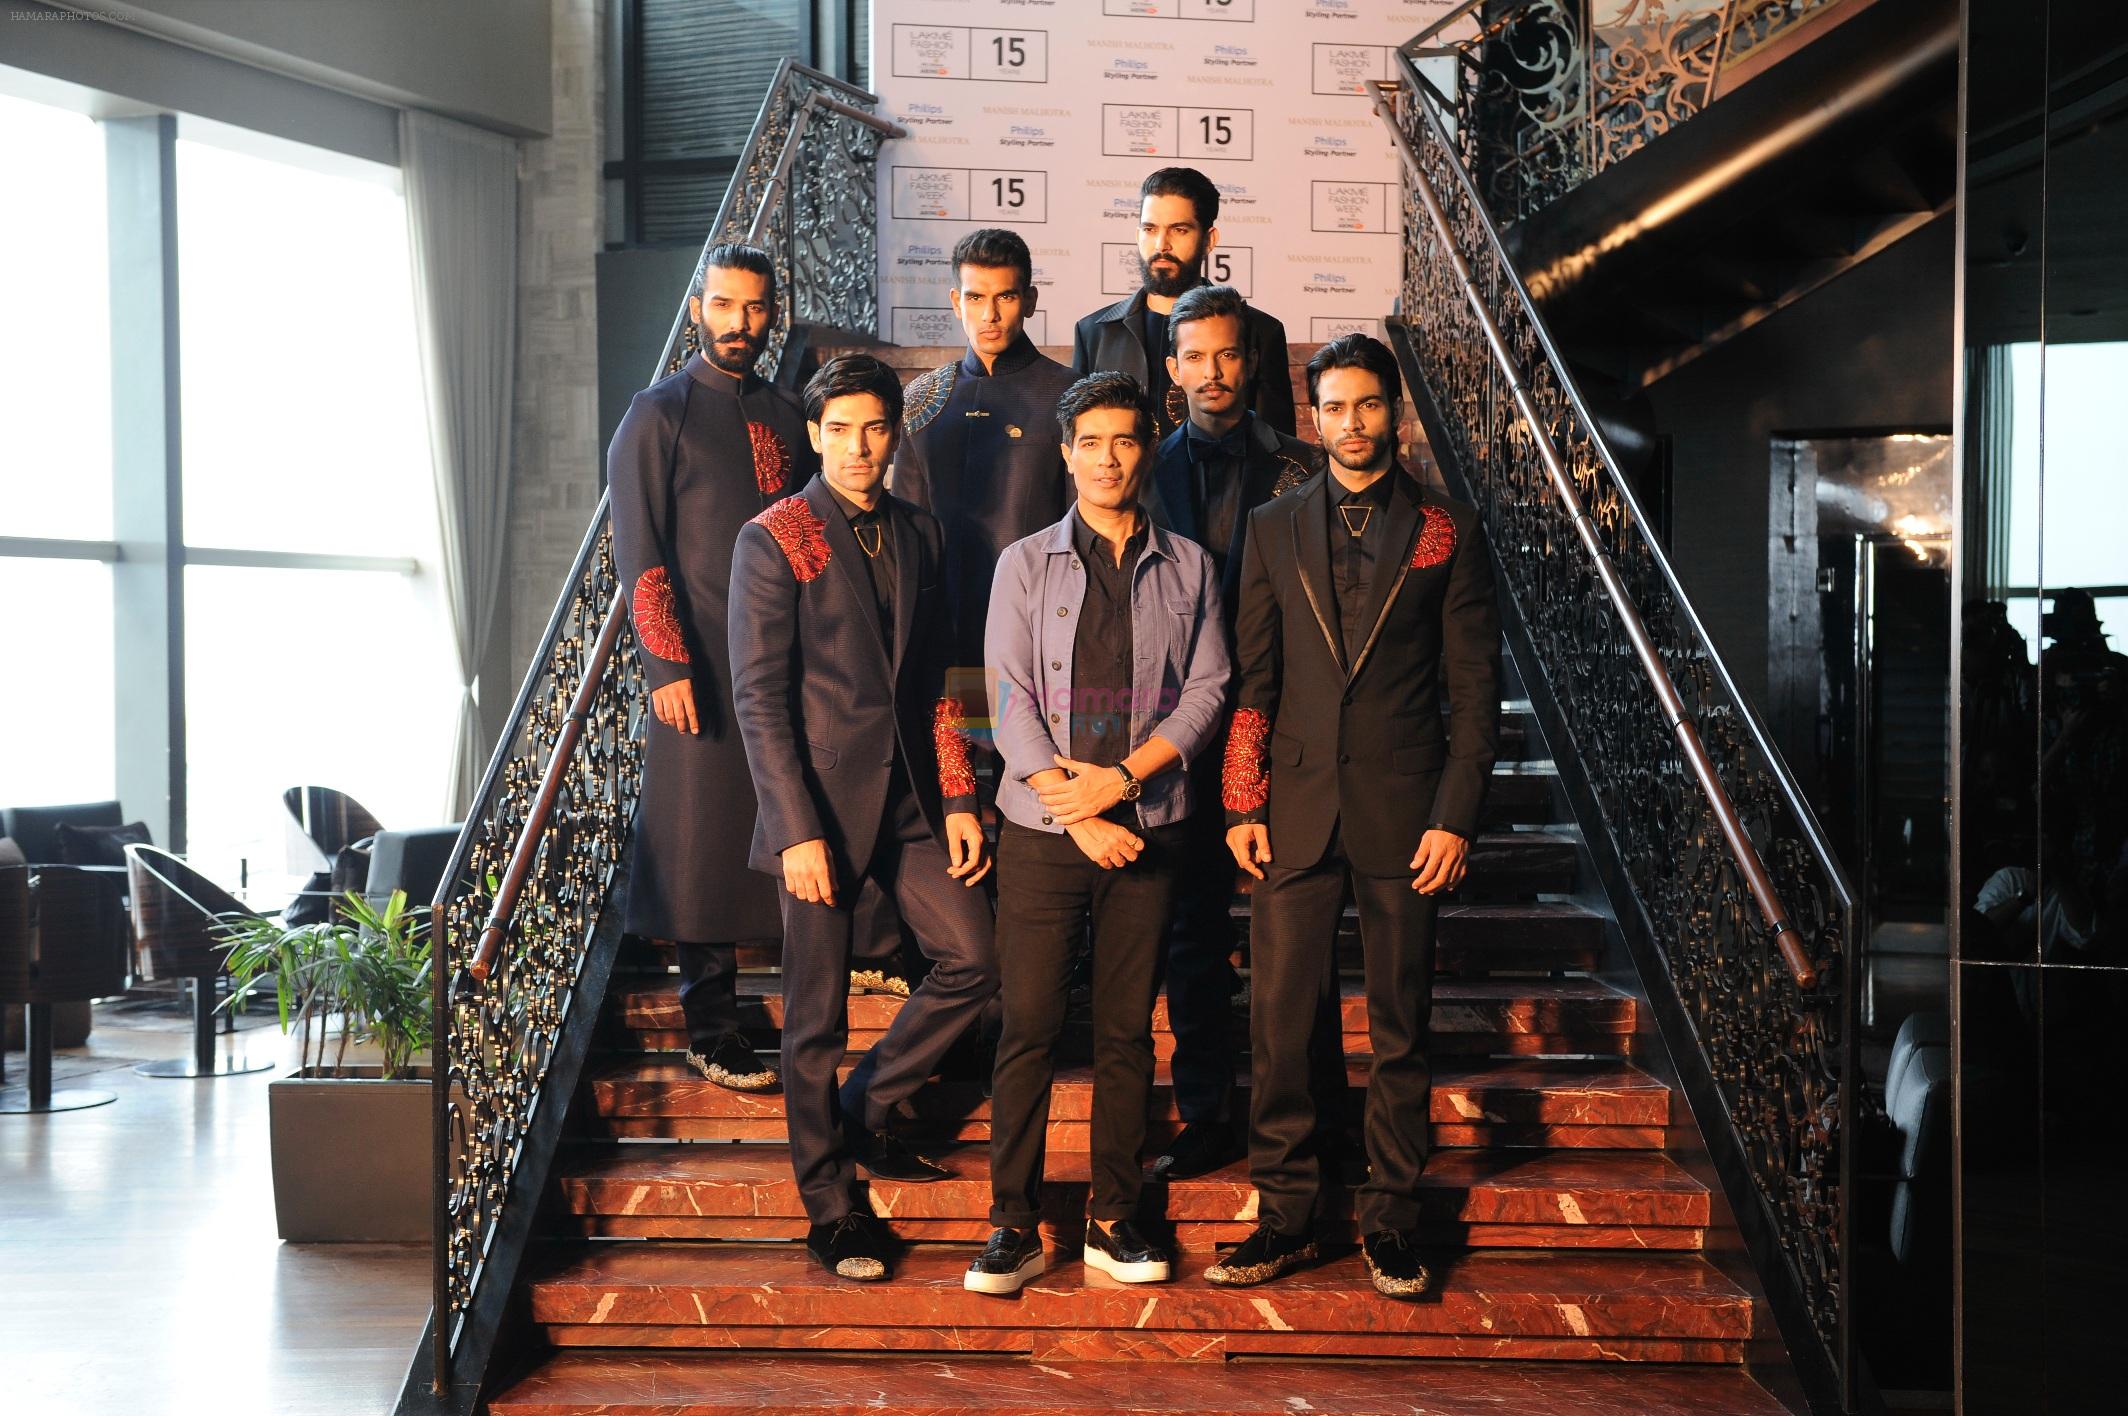 Designer Manish Malhotra with models at the preview of his collection _The Gentlemen's Club_ at Lakme Fashion Week Winter Festive 2015_3